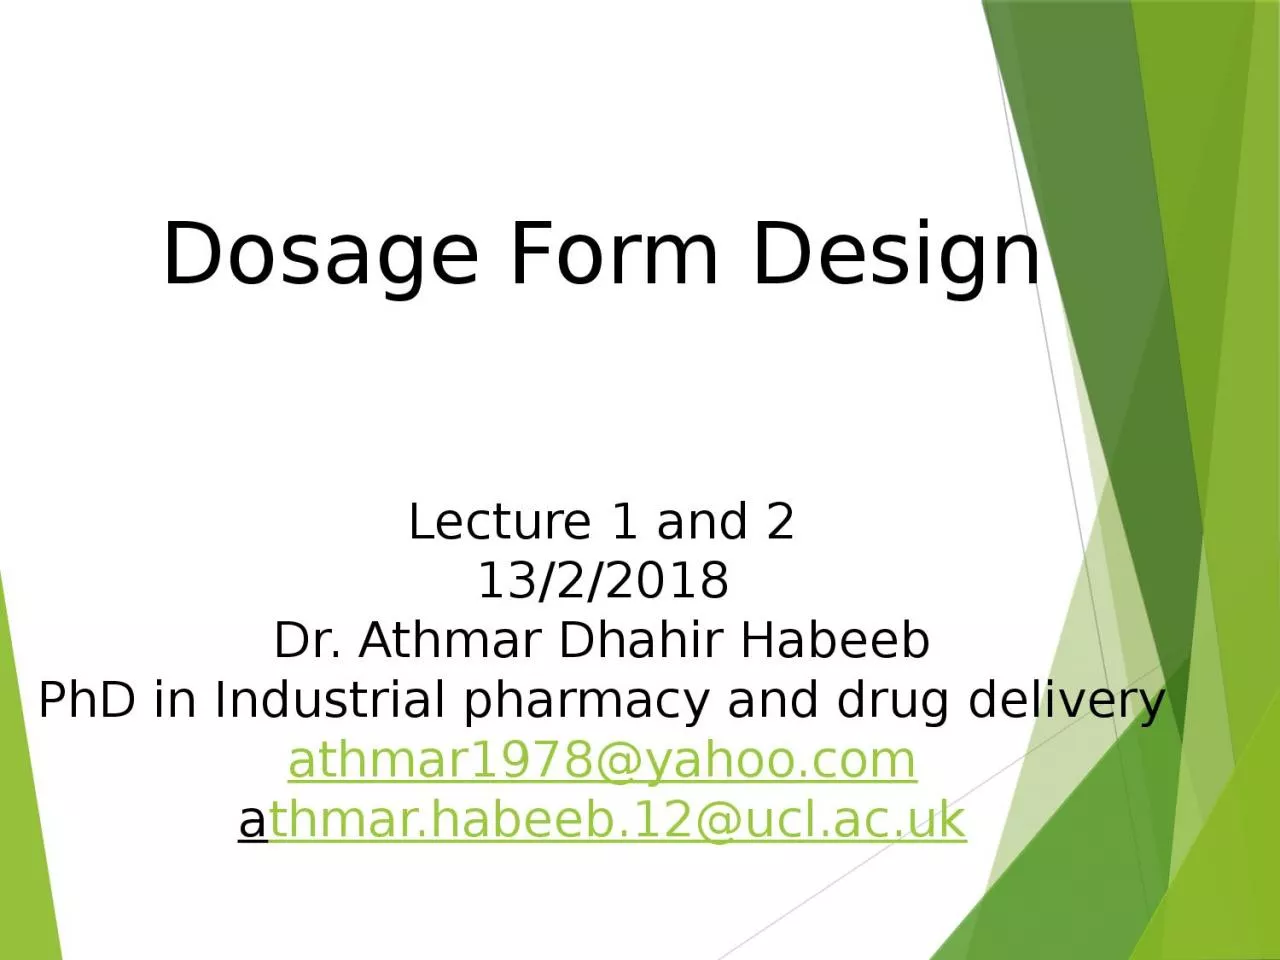 Dosage Form Design Lecture 1 and 2